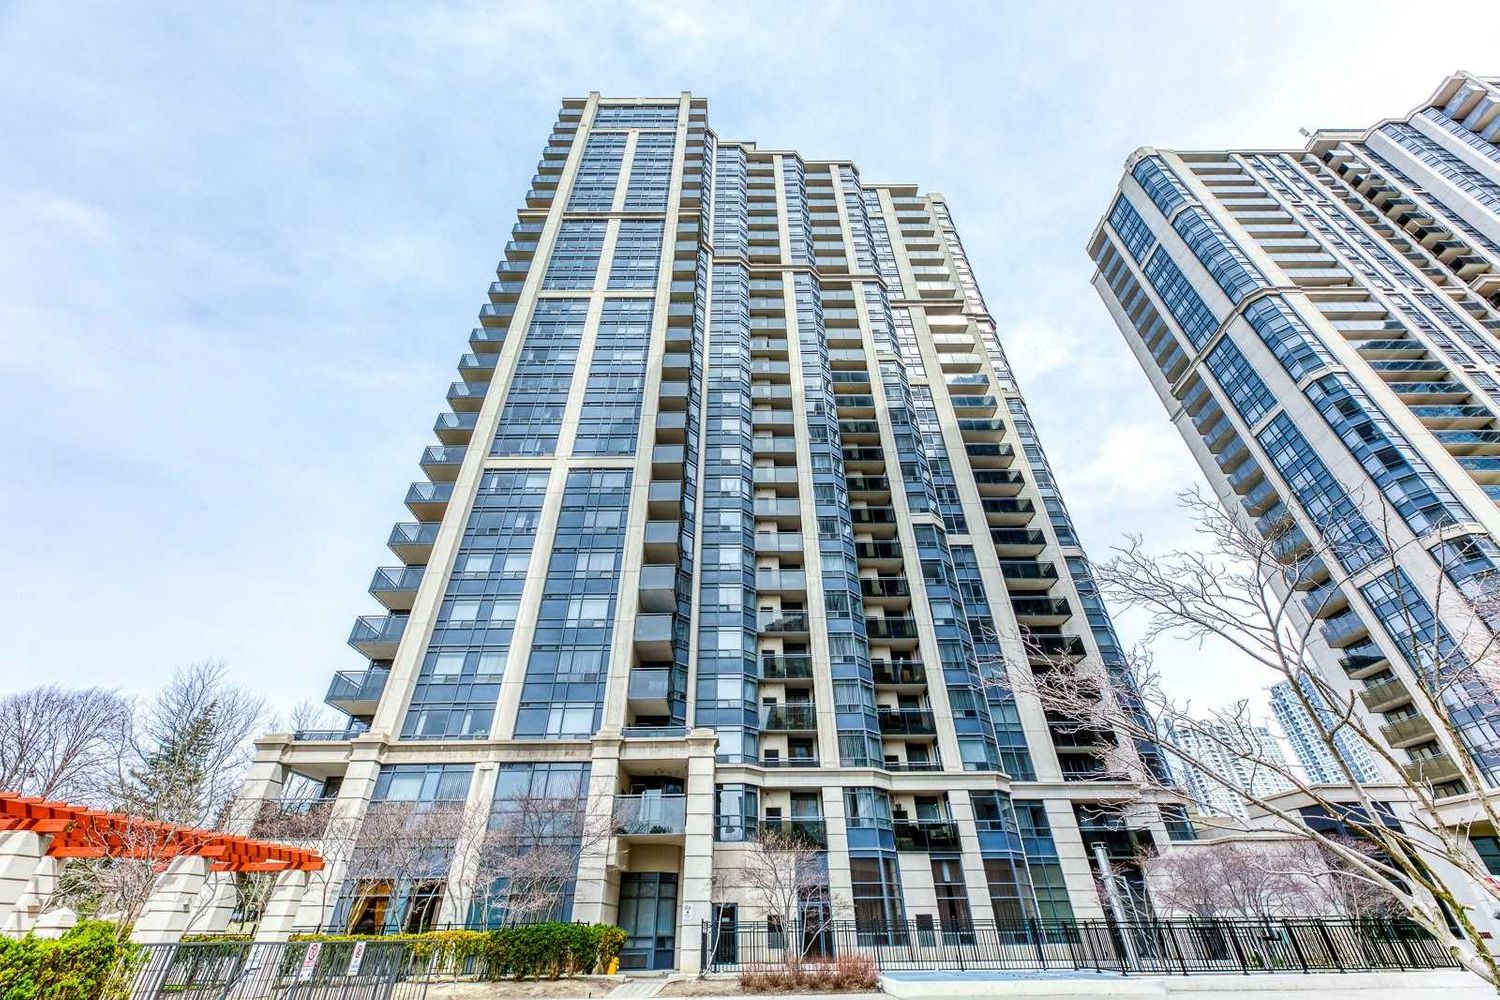 153 Beecroft Road. The Broadway Condos is located in  North York, Toronto - image #2 of 2